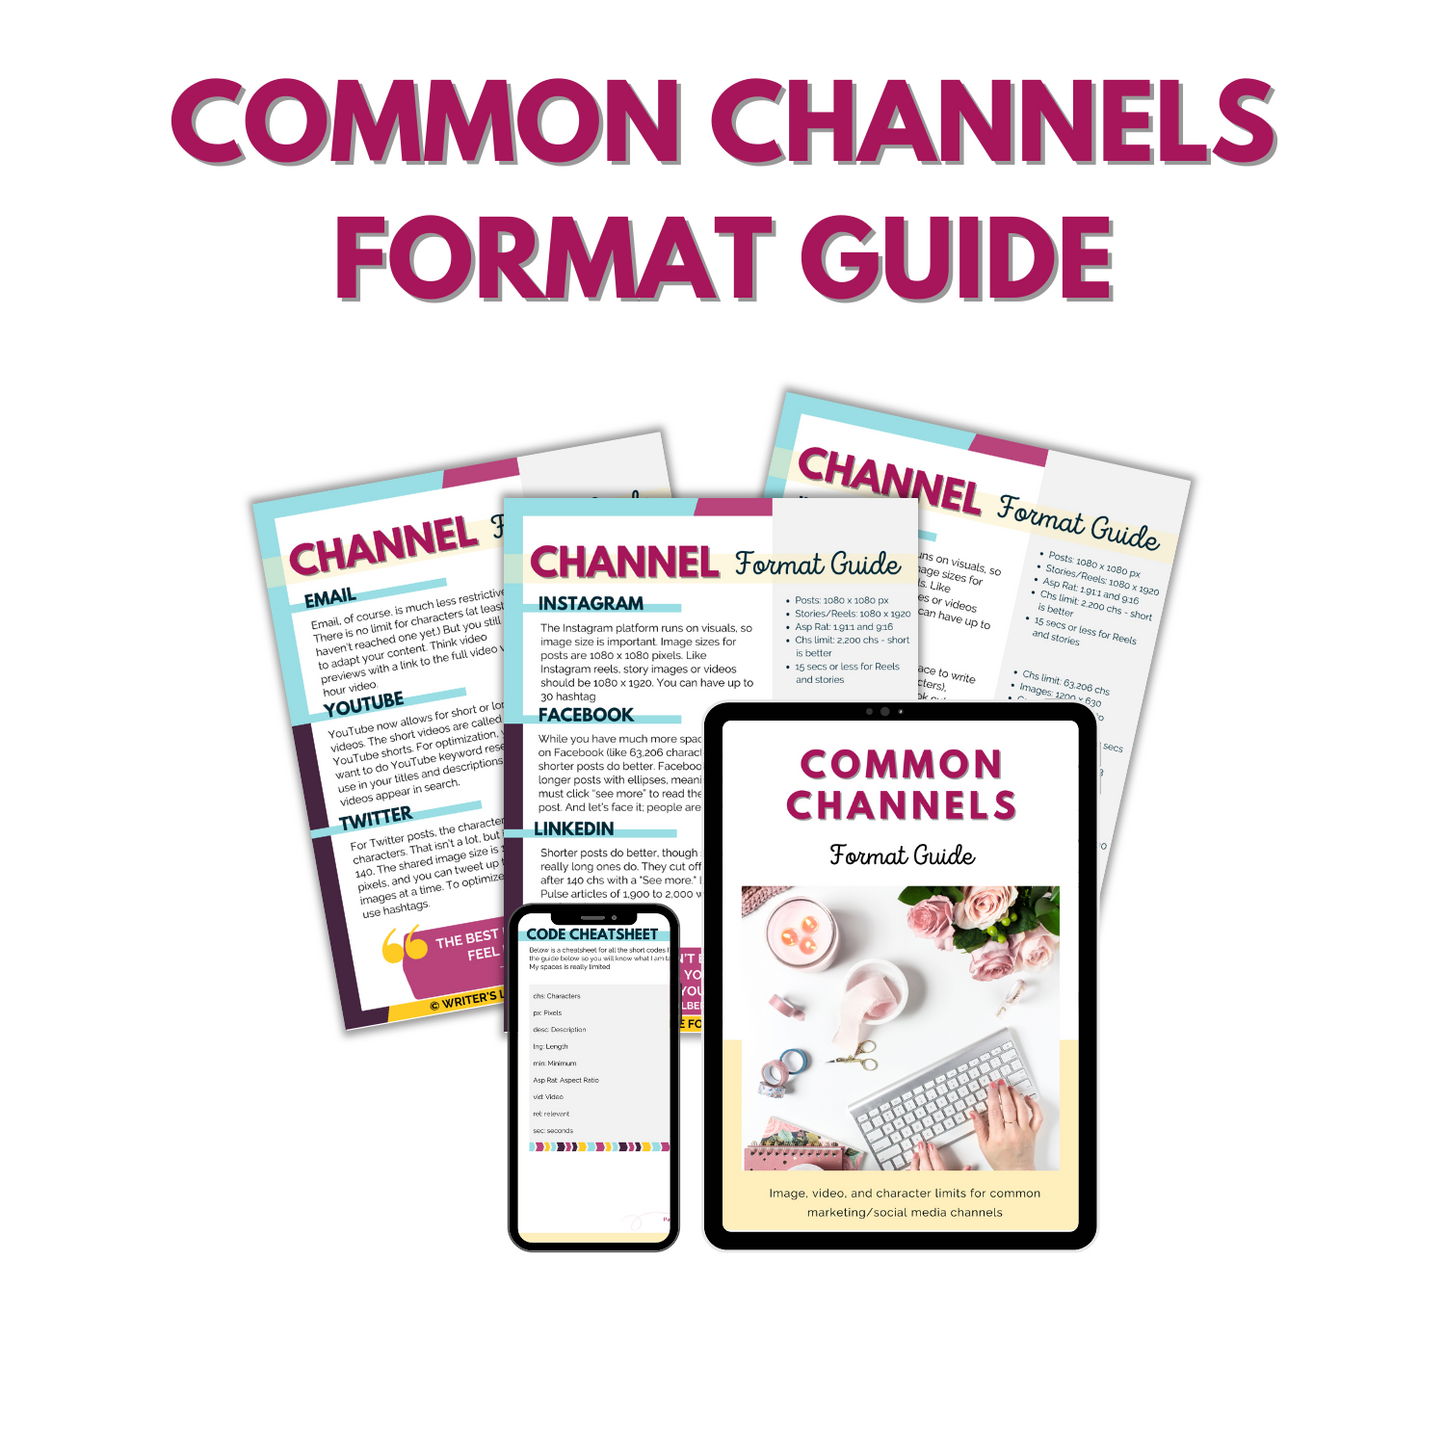 Common Social Media Channels Format Guide